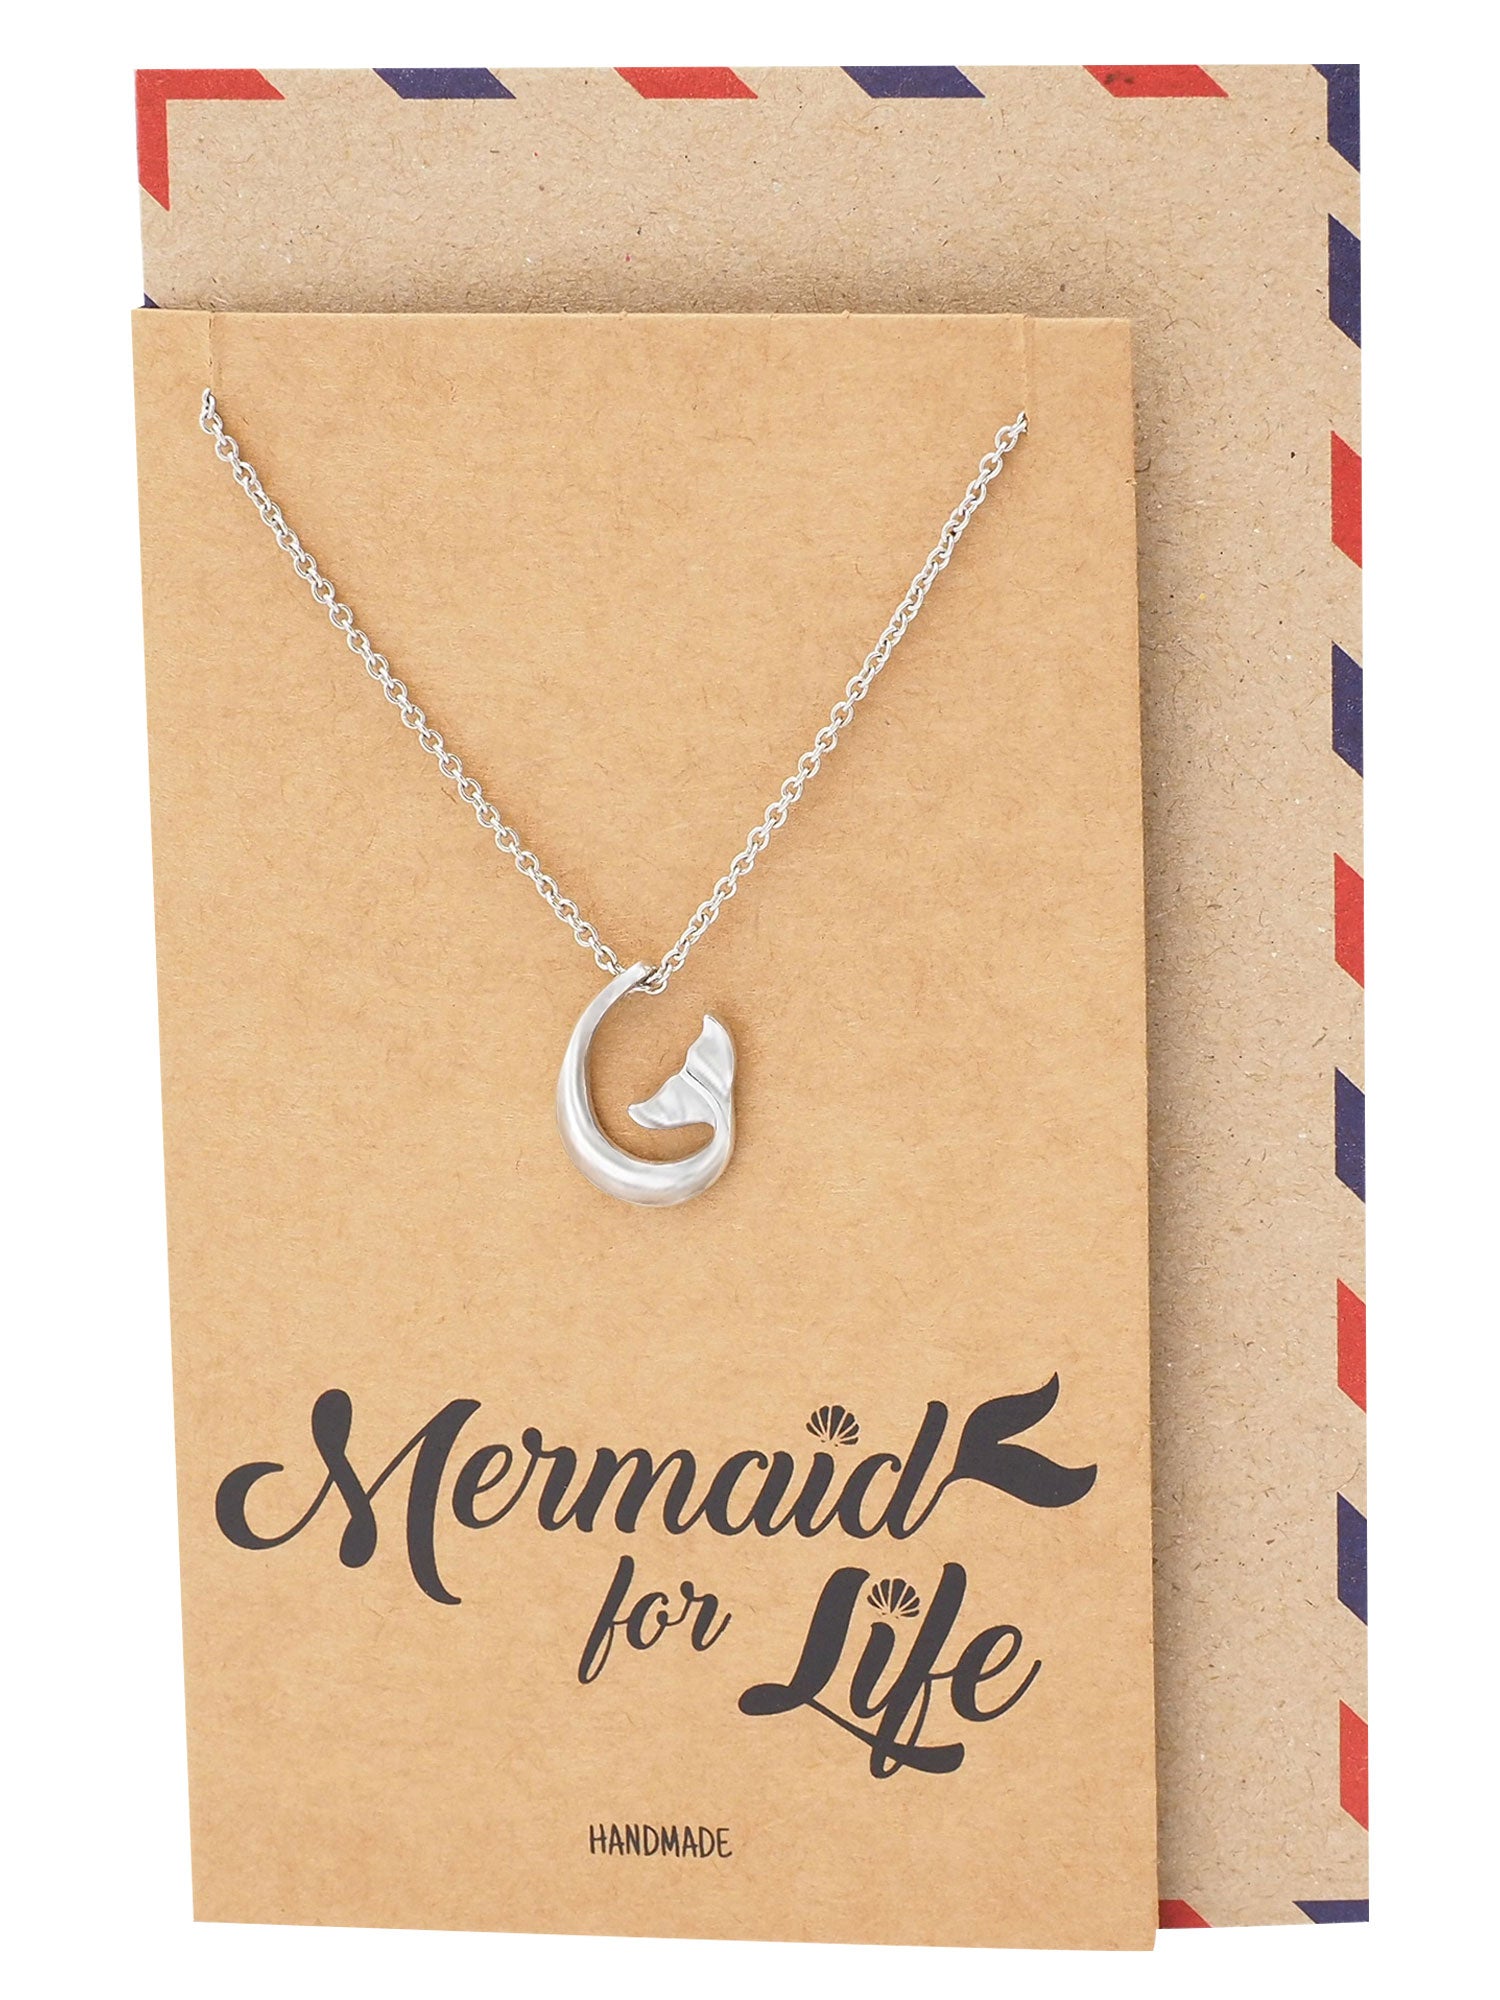 Clemence Mermaid Tail Pendant Necklace, Gifts for Mermaid Lovers